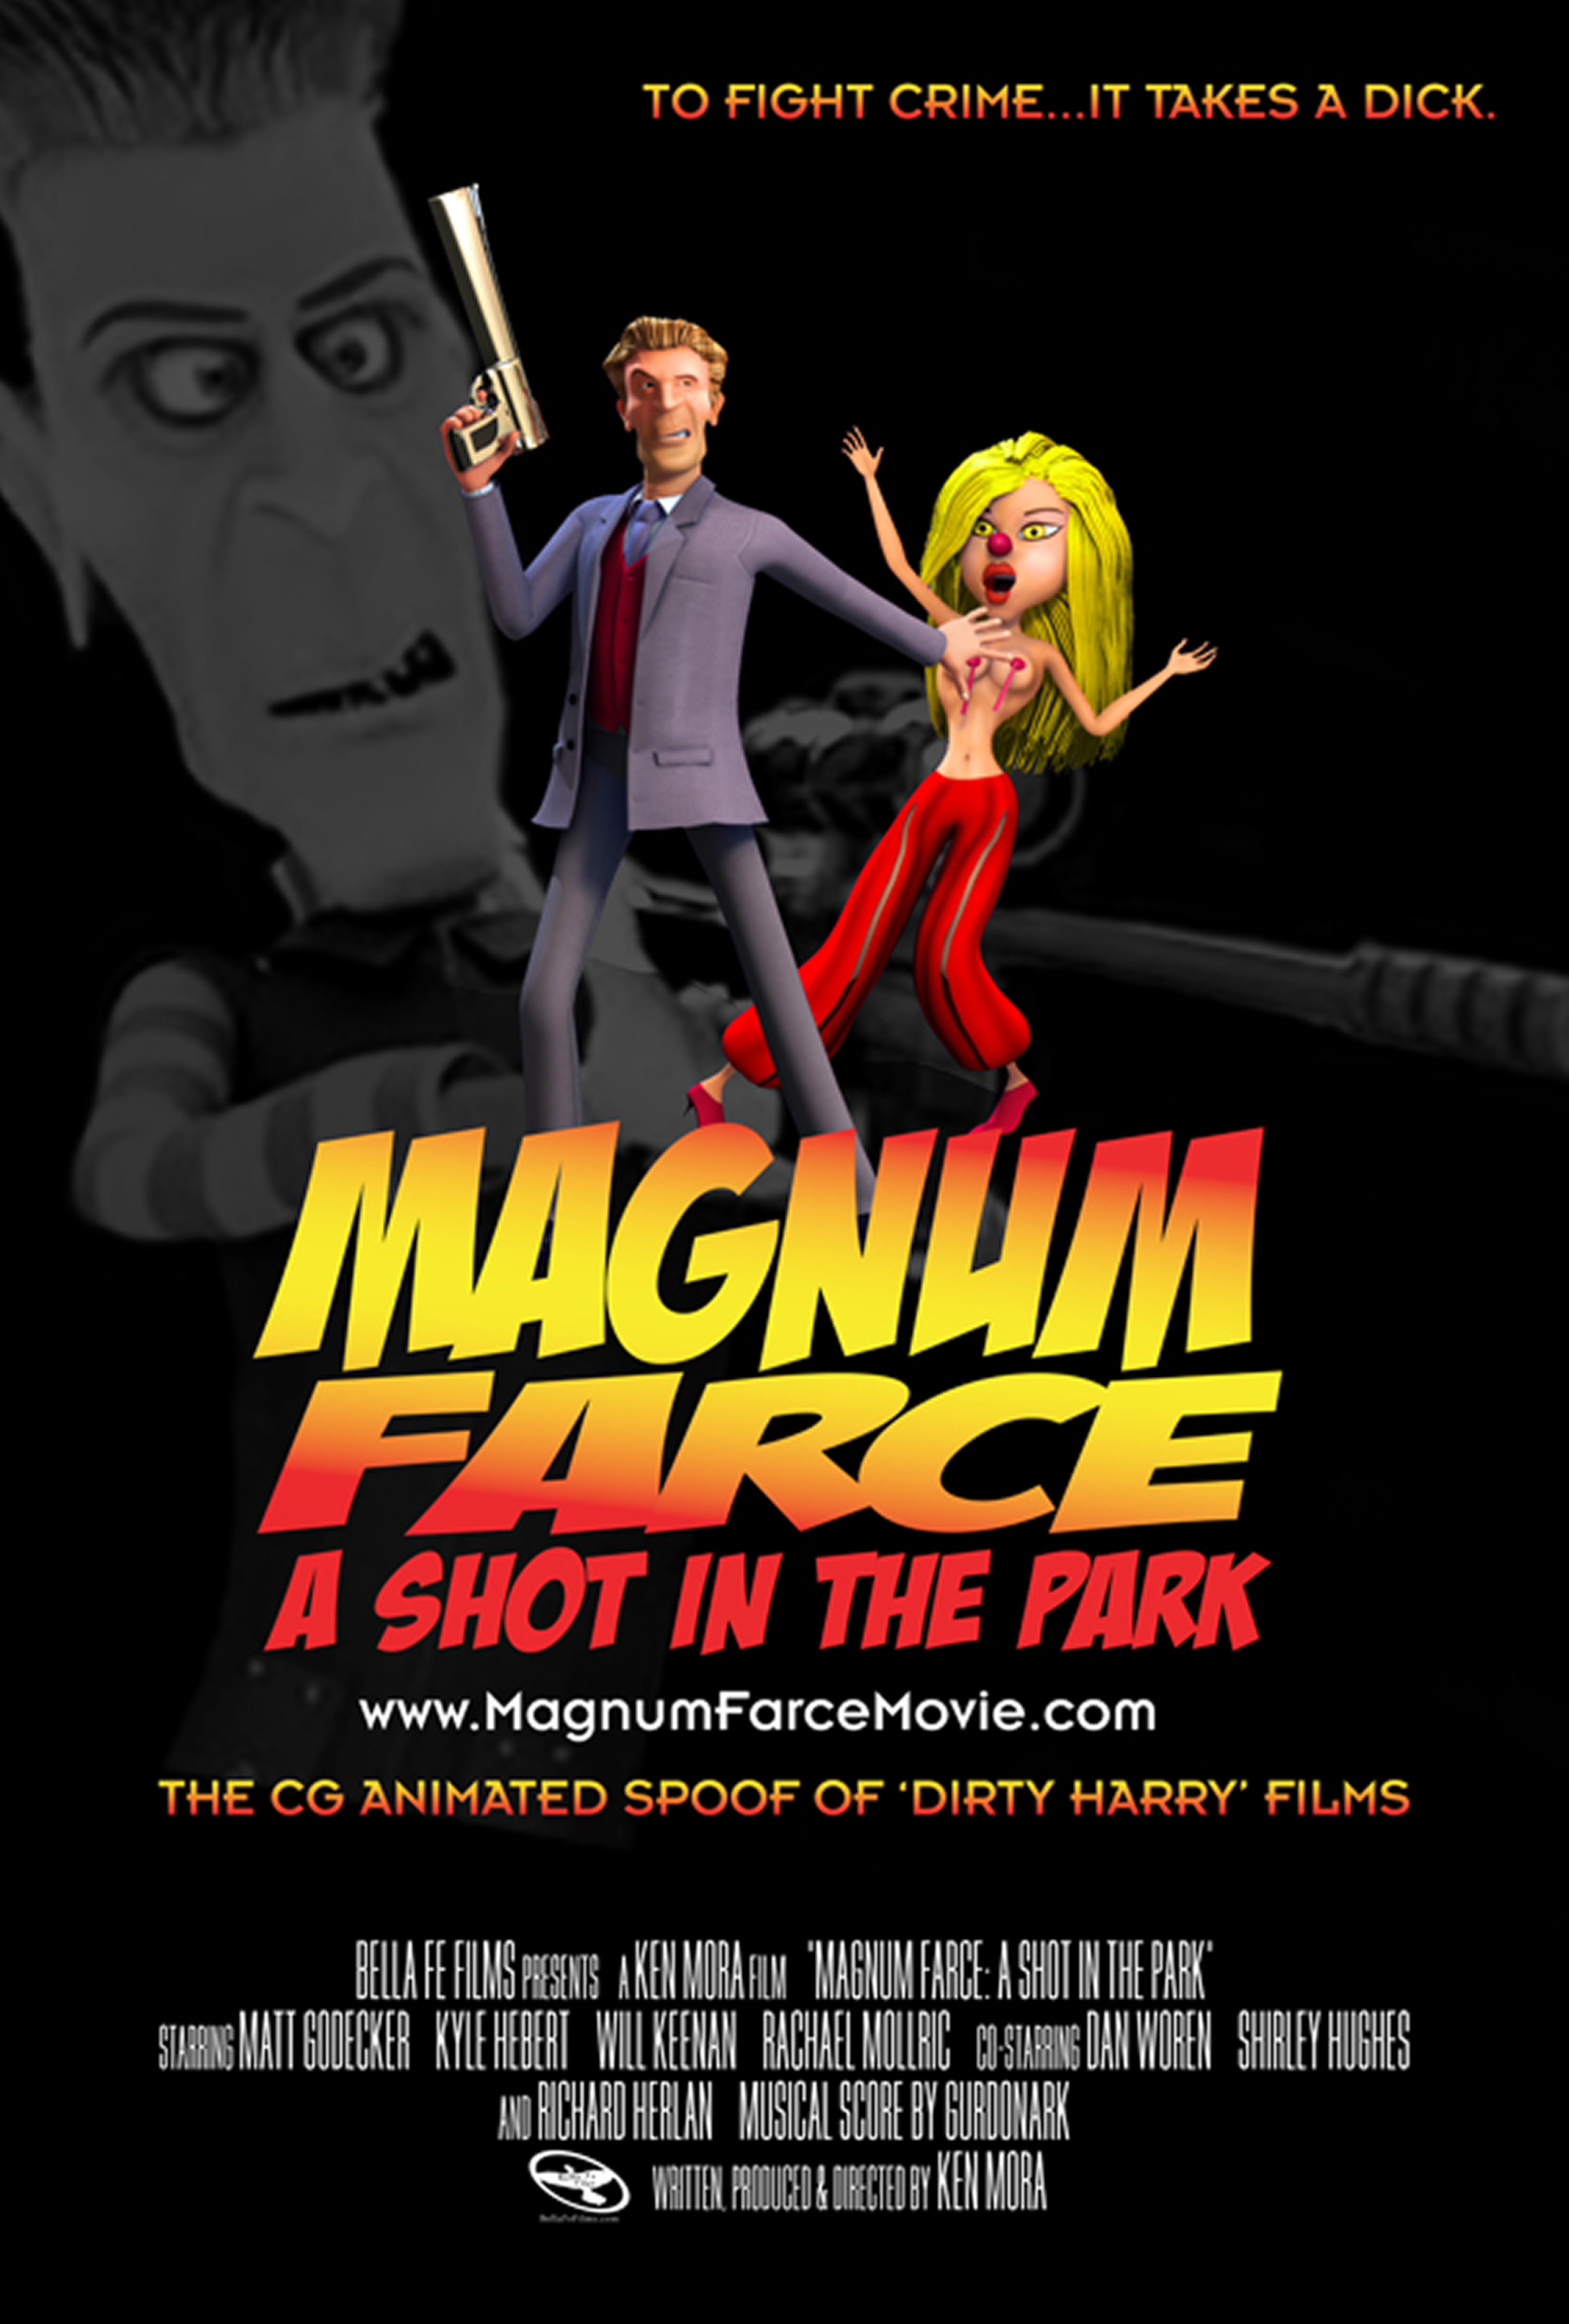 Magnum Farce, the CG Animated Spoof of Dirty Harry films.